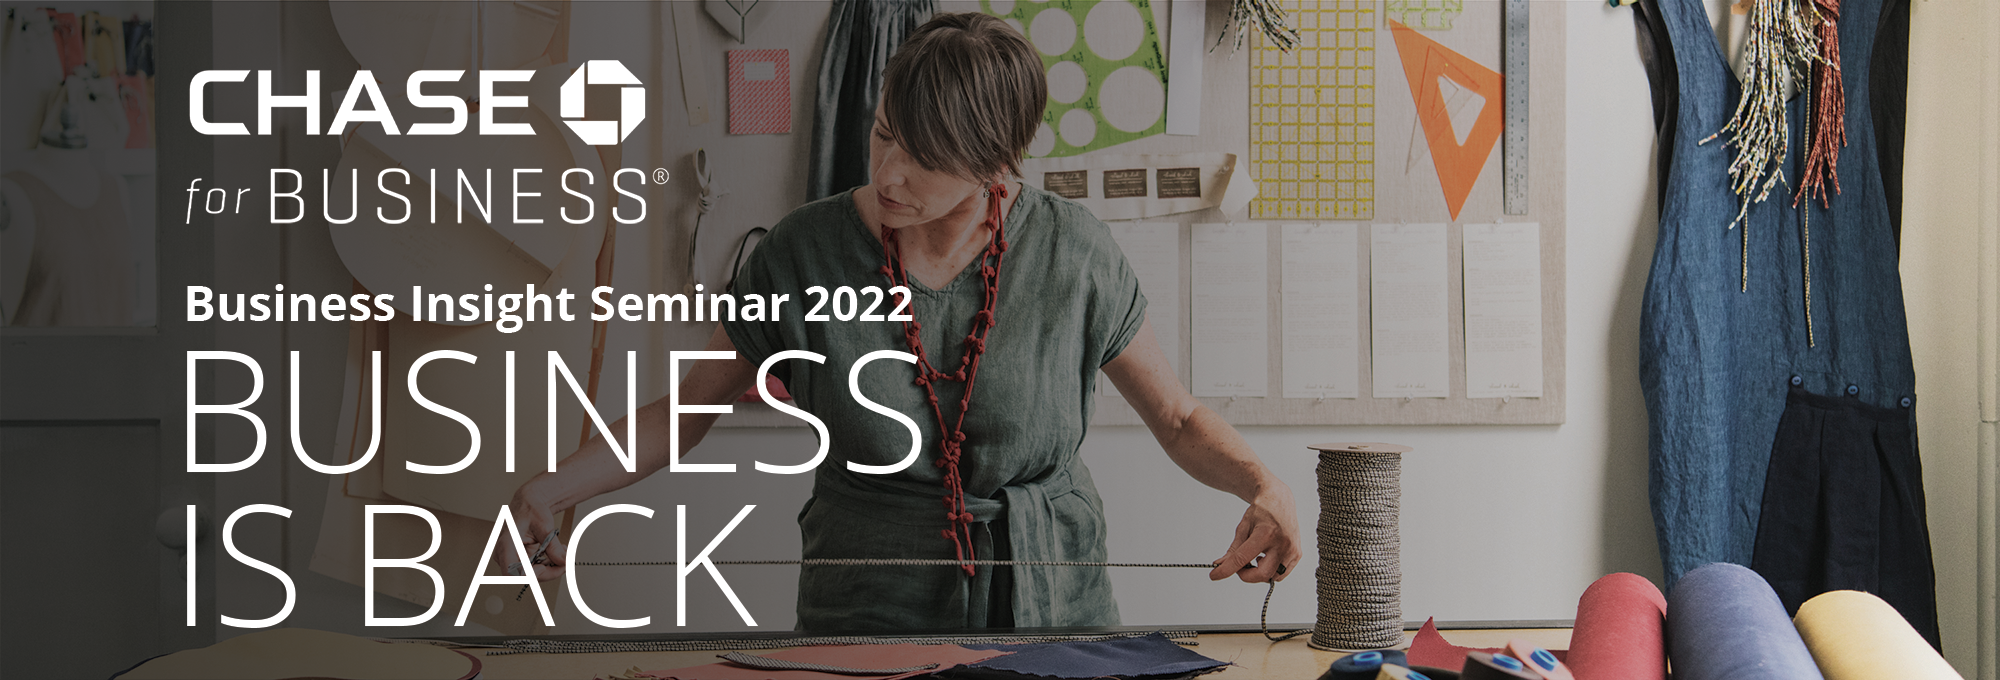 Chase for Business Business Insight Seminar 2022 Business is Back